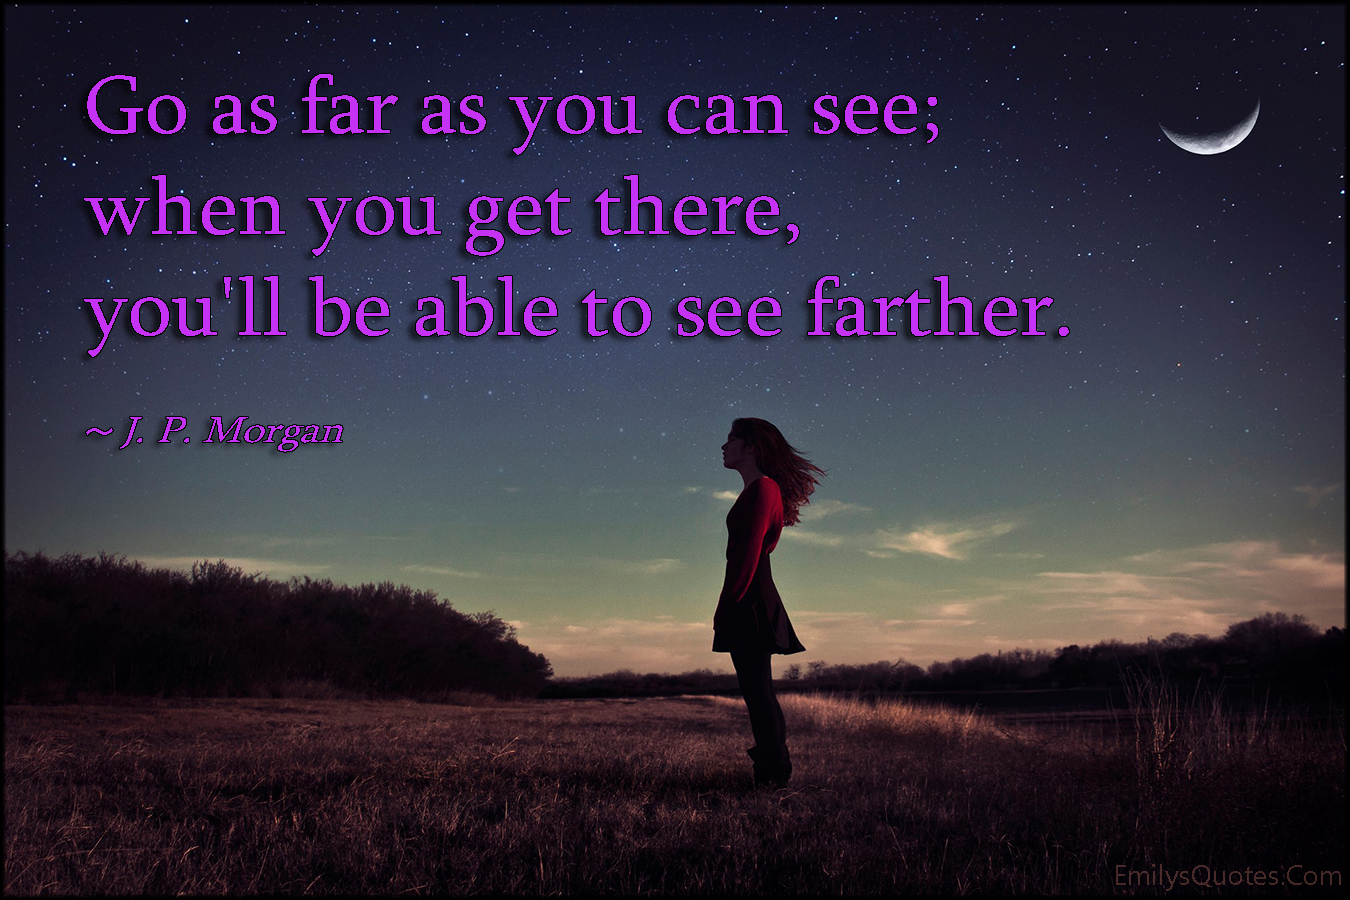 Go as far as you can see; when you get there, you’ll be able to see farther